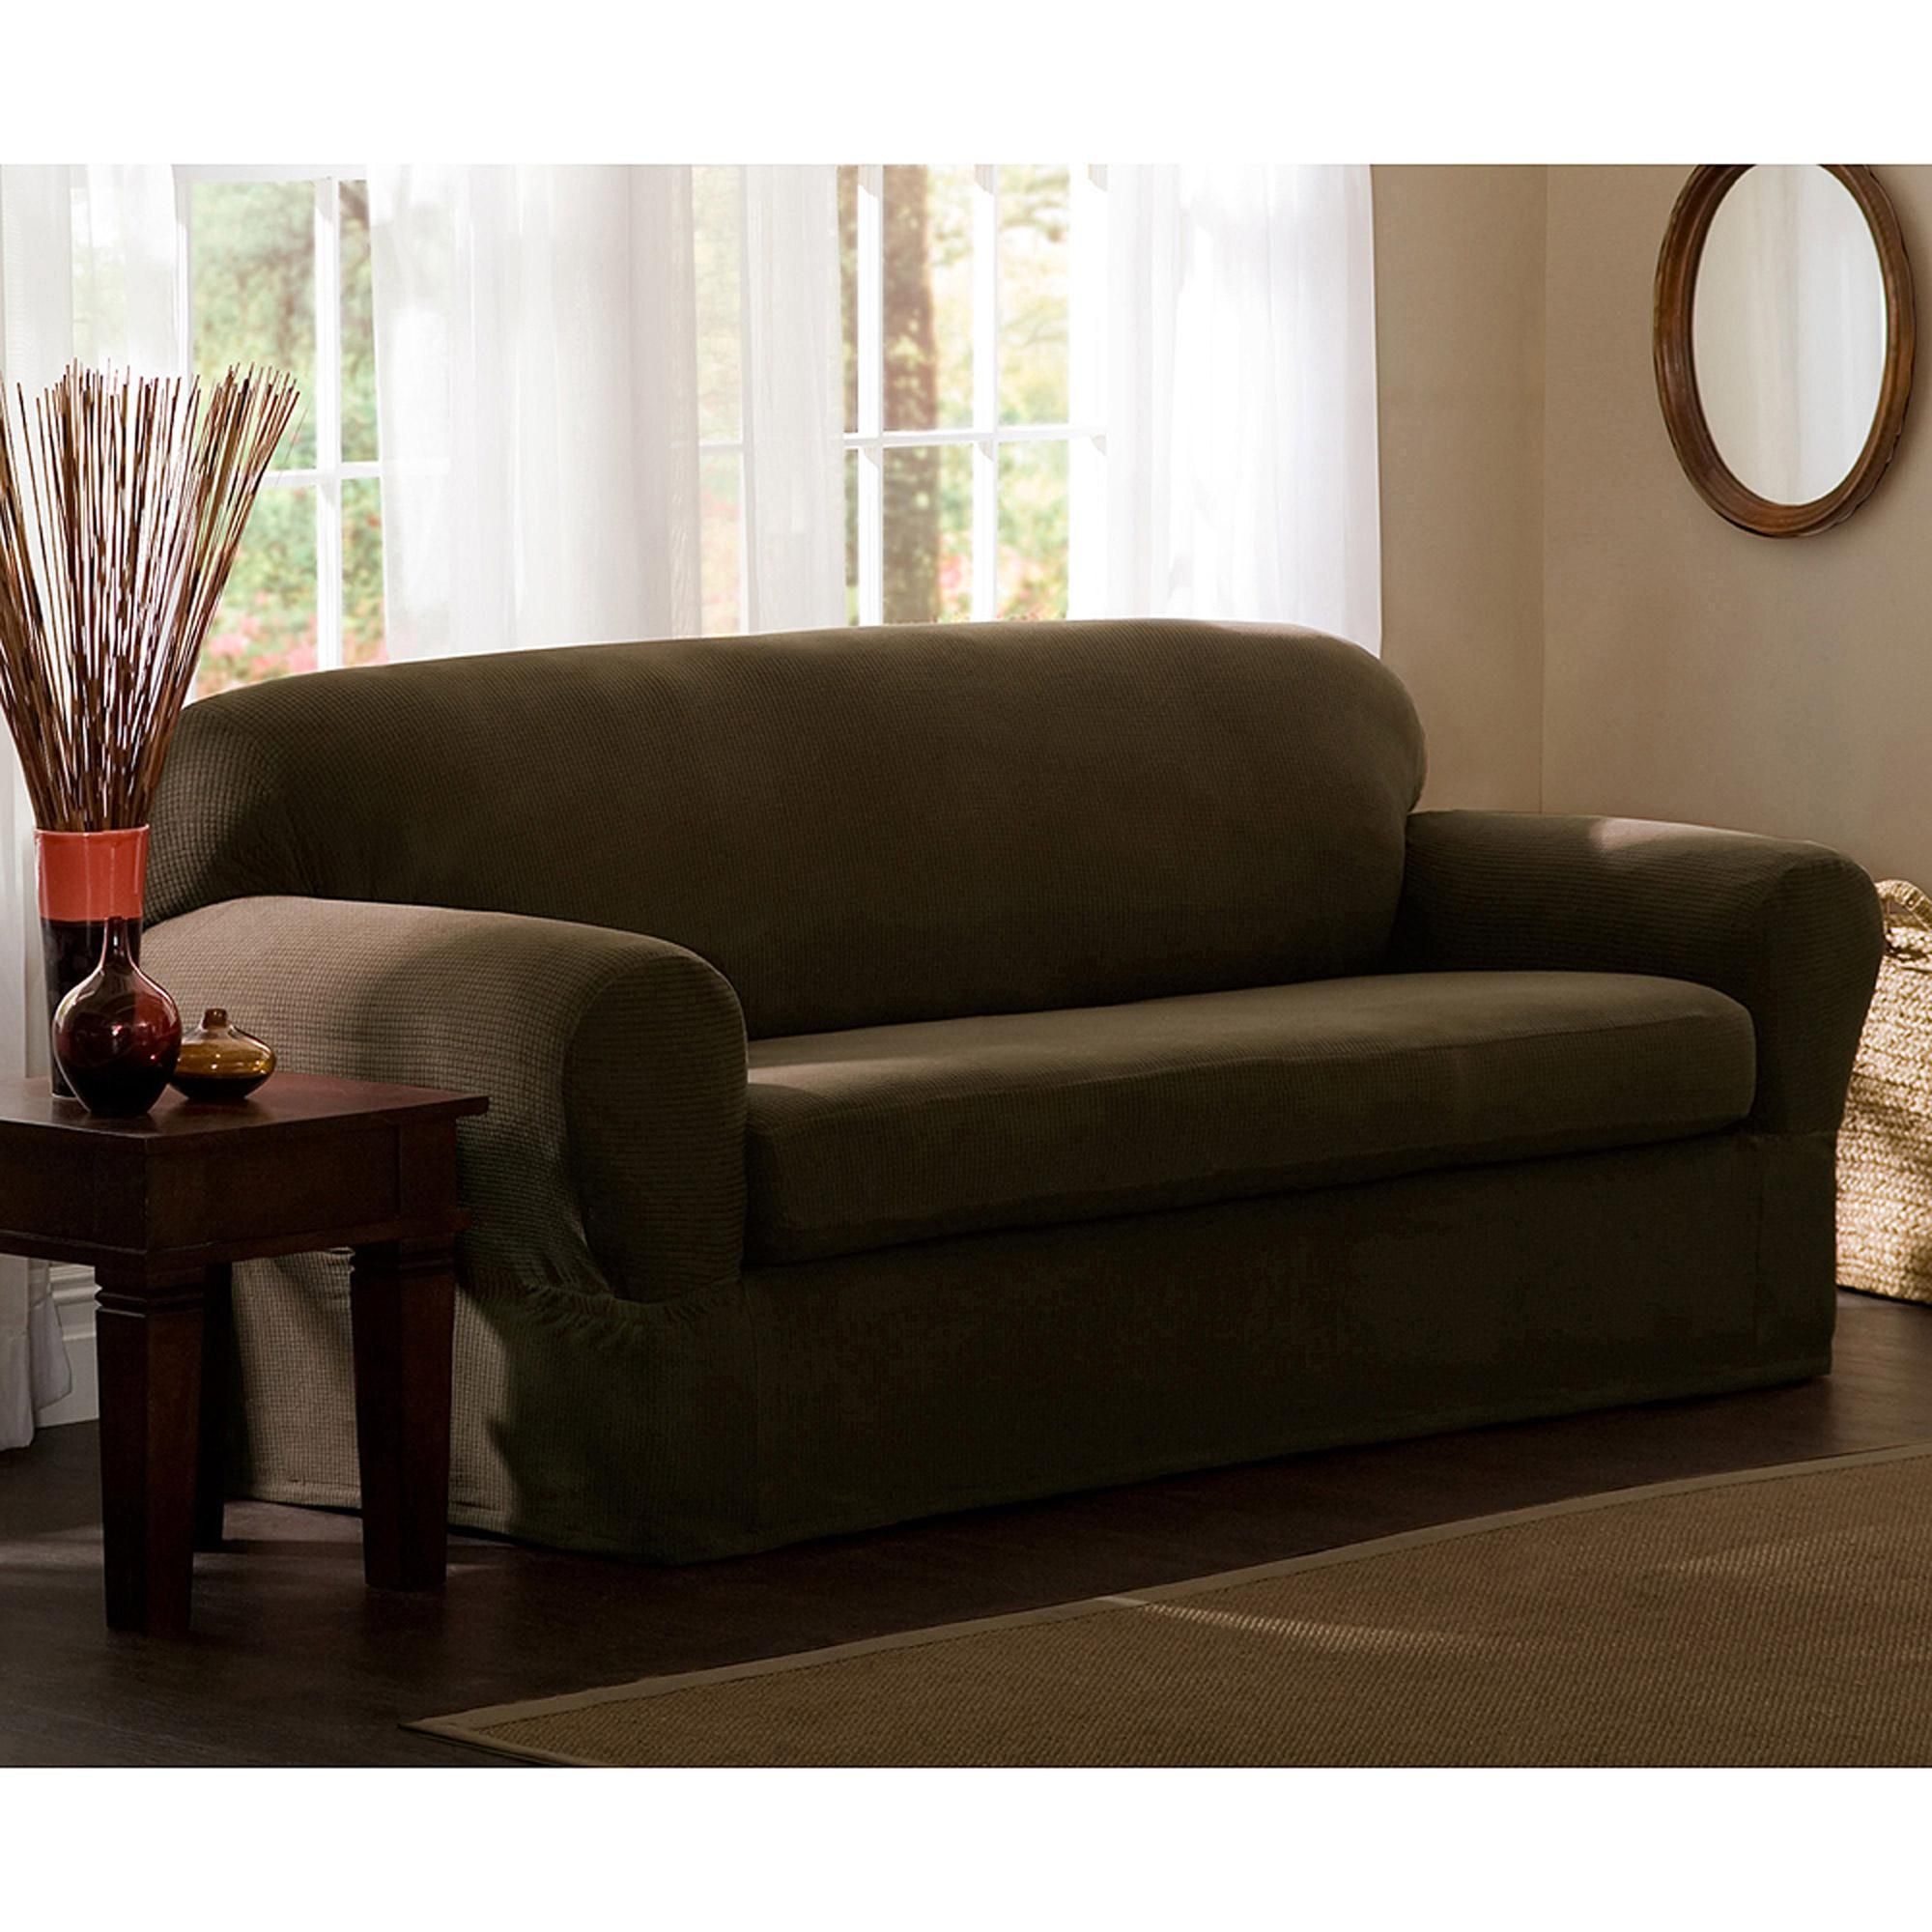 Maytex Reeves Polyester/spandex Loveseat Slipcover – Walmart With Regard To Loveseat Slipcovers 3 Pieces (View 4 of 20)